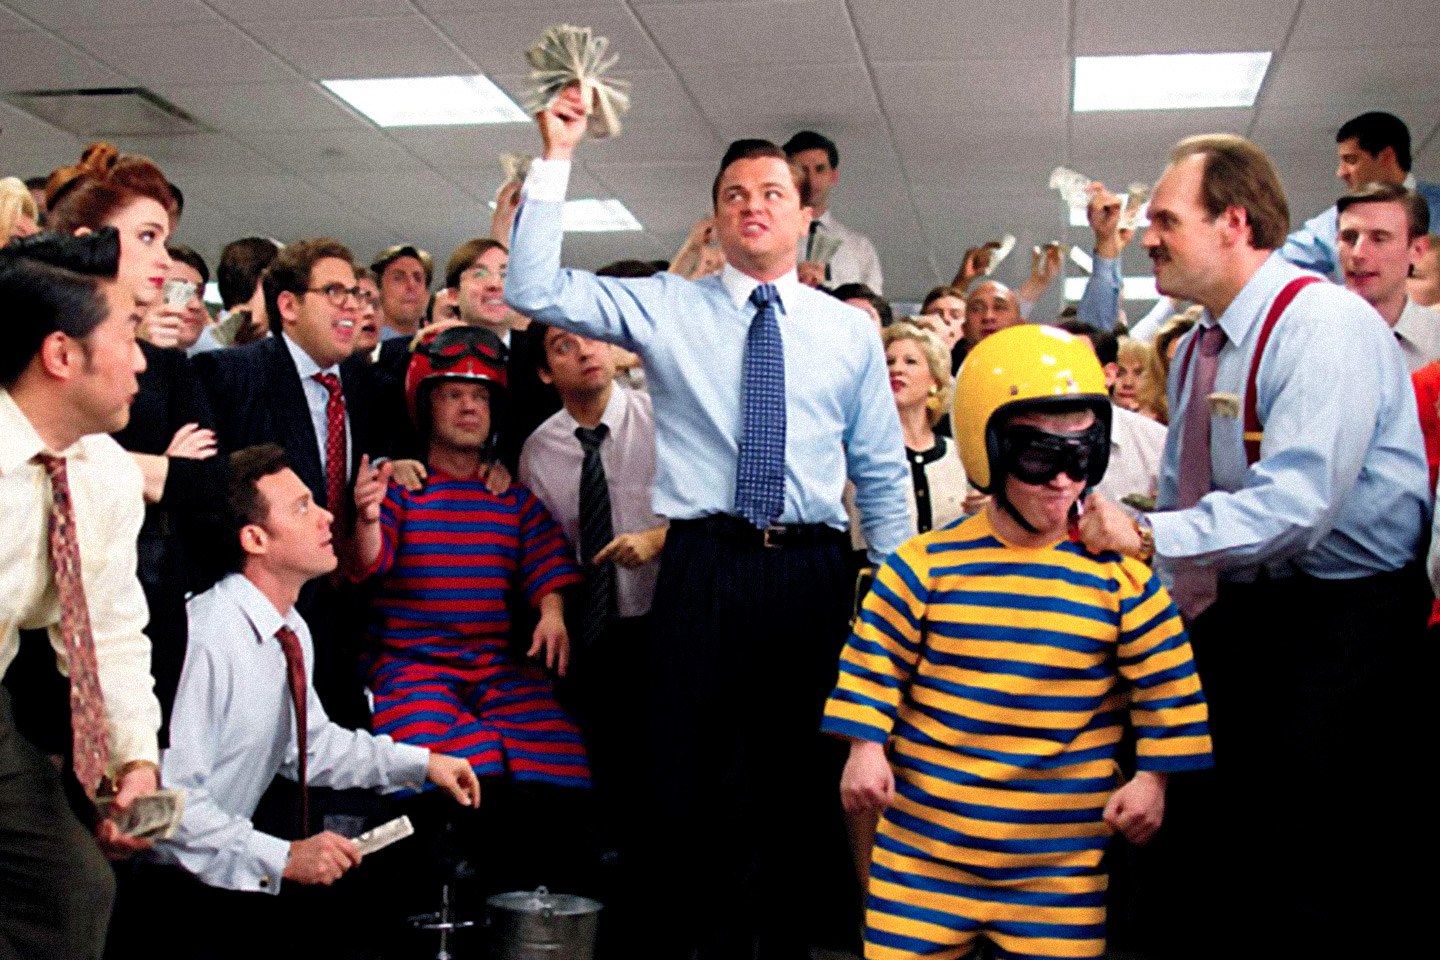 What’s Your IQ, Based Only on Your Opinions About Movies? The Wolf of Wall Street